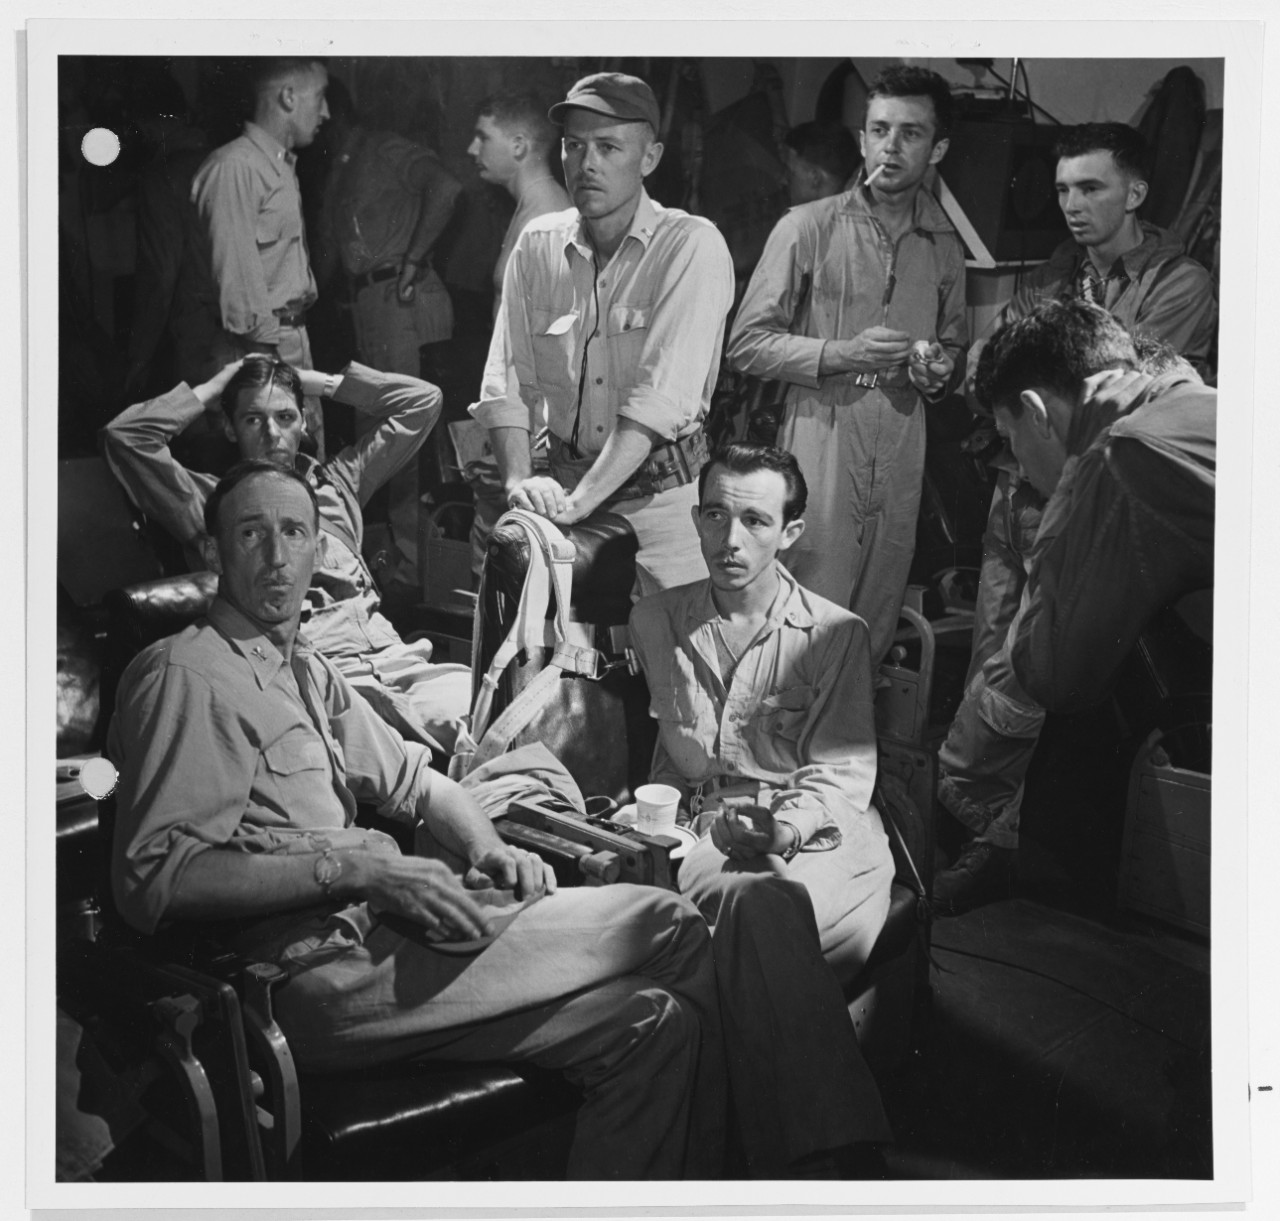 CAPT. Stuart H. Ingersoll (left), C/O of USS Monterey (CVL-26) in the pilots ready room of his ship, listening to intern-plane conversations of bomber pilots during a raid on Tinian, 11 June 1944. With him are fighter pilots, and ship's Air Group Commander, LCDR Roger W. Mehle (seated). 